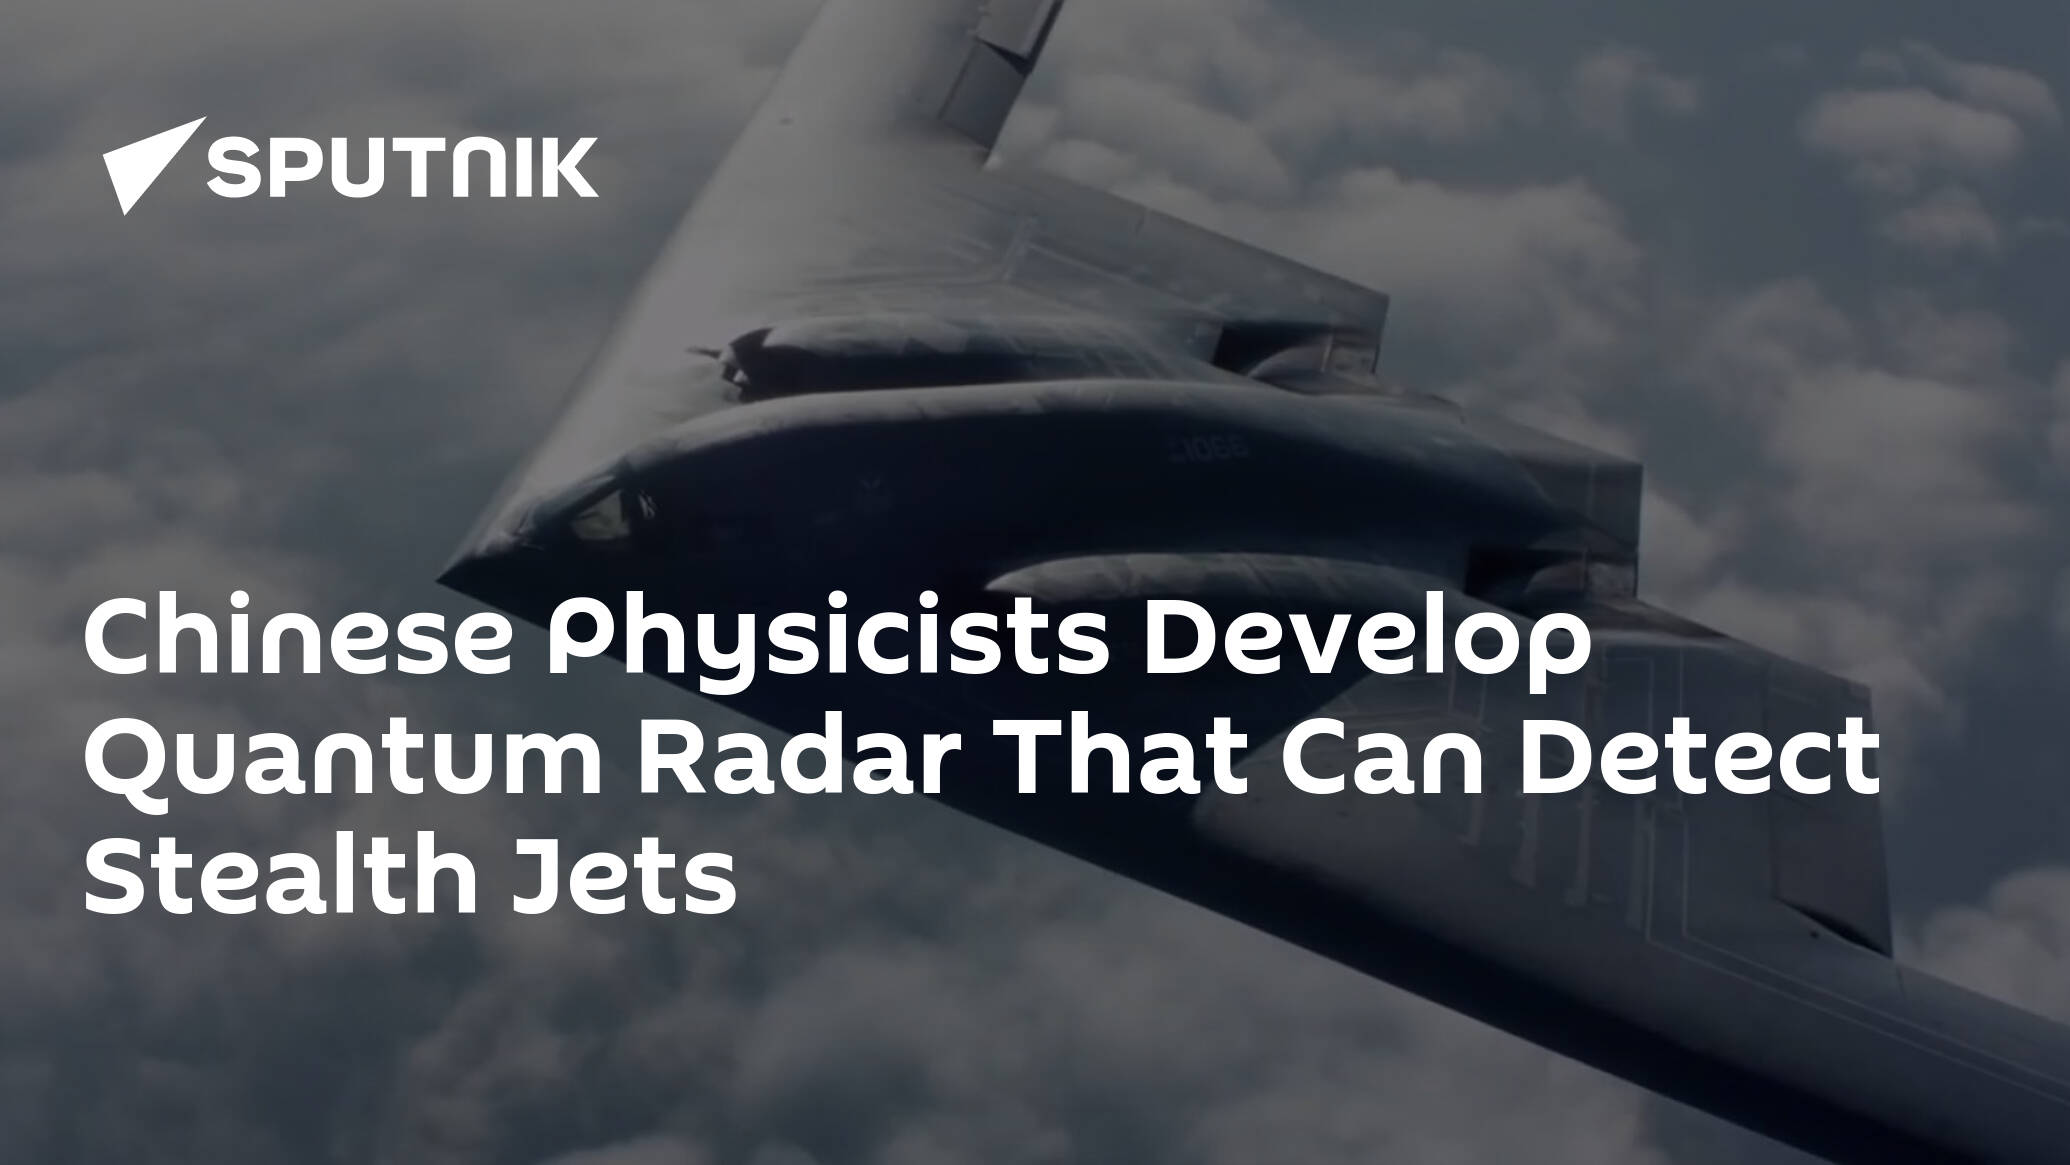 Chinese Physicists Develop Quantum Radar That Can Detect Stealth Jets 04102016 Sputnik 